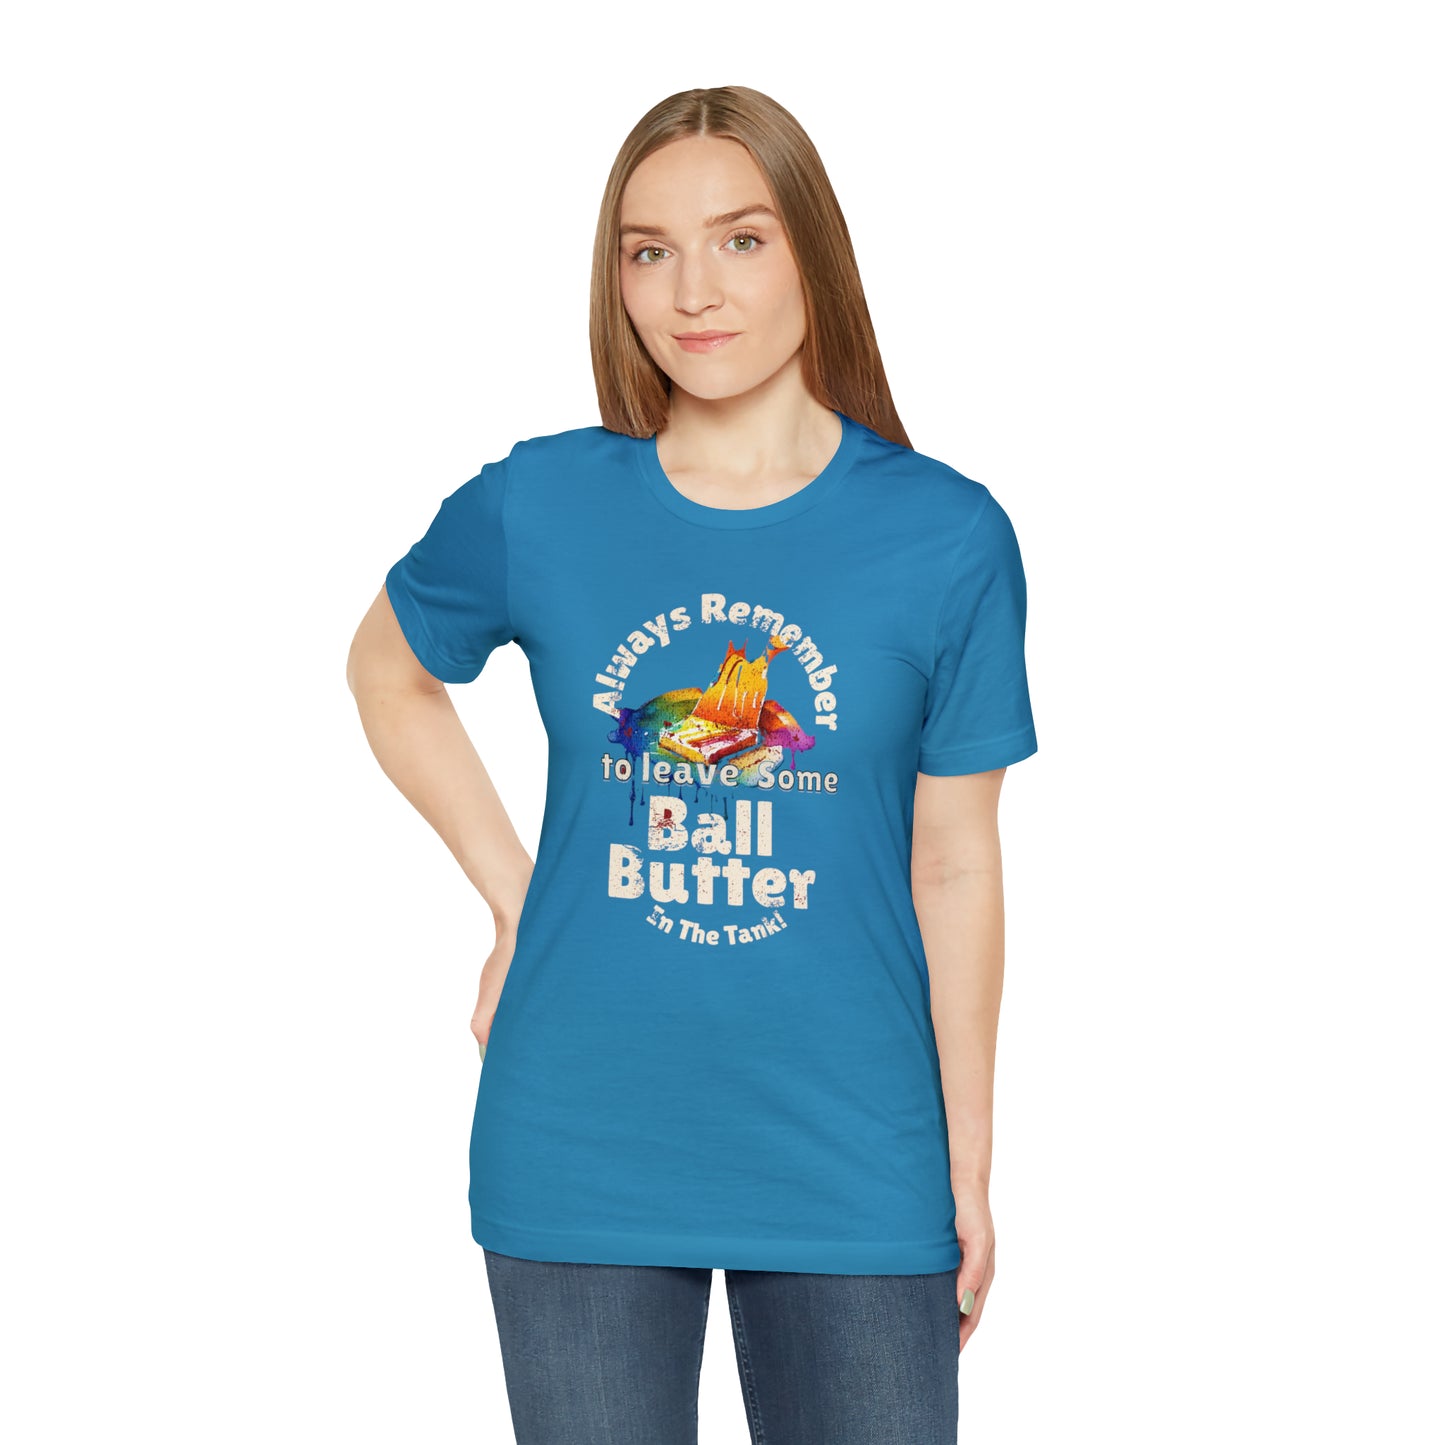 Always Remember to Leave Some Ball Butter in the Tank! Unisex Jersey Short Sleeve Tee